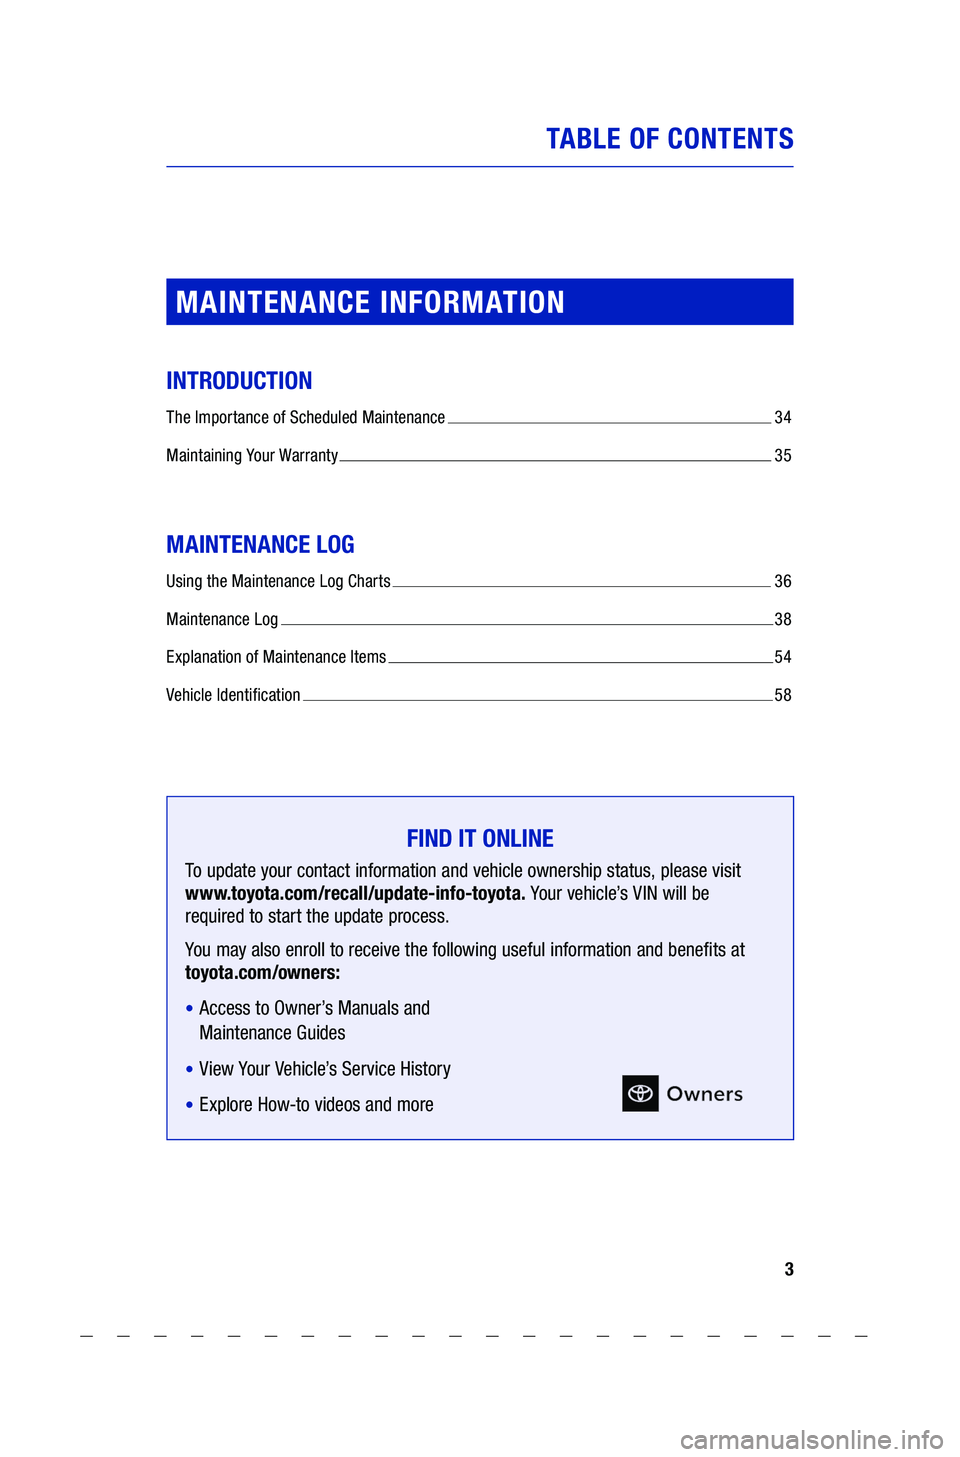 TOYOTA COROLLA 2021  Warranties & Maintenance Guides (in English) 3
TA BL E OF CONTENTS
MAINTENANCE  INFORMATION
INTRODUCTION
The Importance  of Scheduled  Maintenance   34
Maintaining Your  Warranty 
 35
MAINTENANCE  LOG
Using the Maintenance  Log Charts   36
Maint